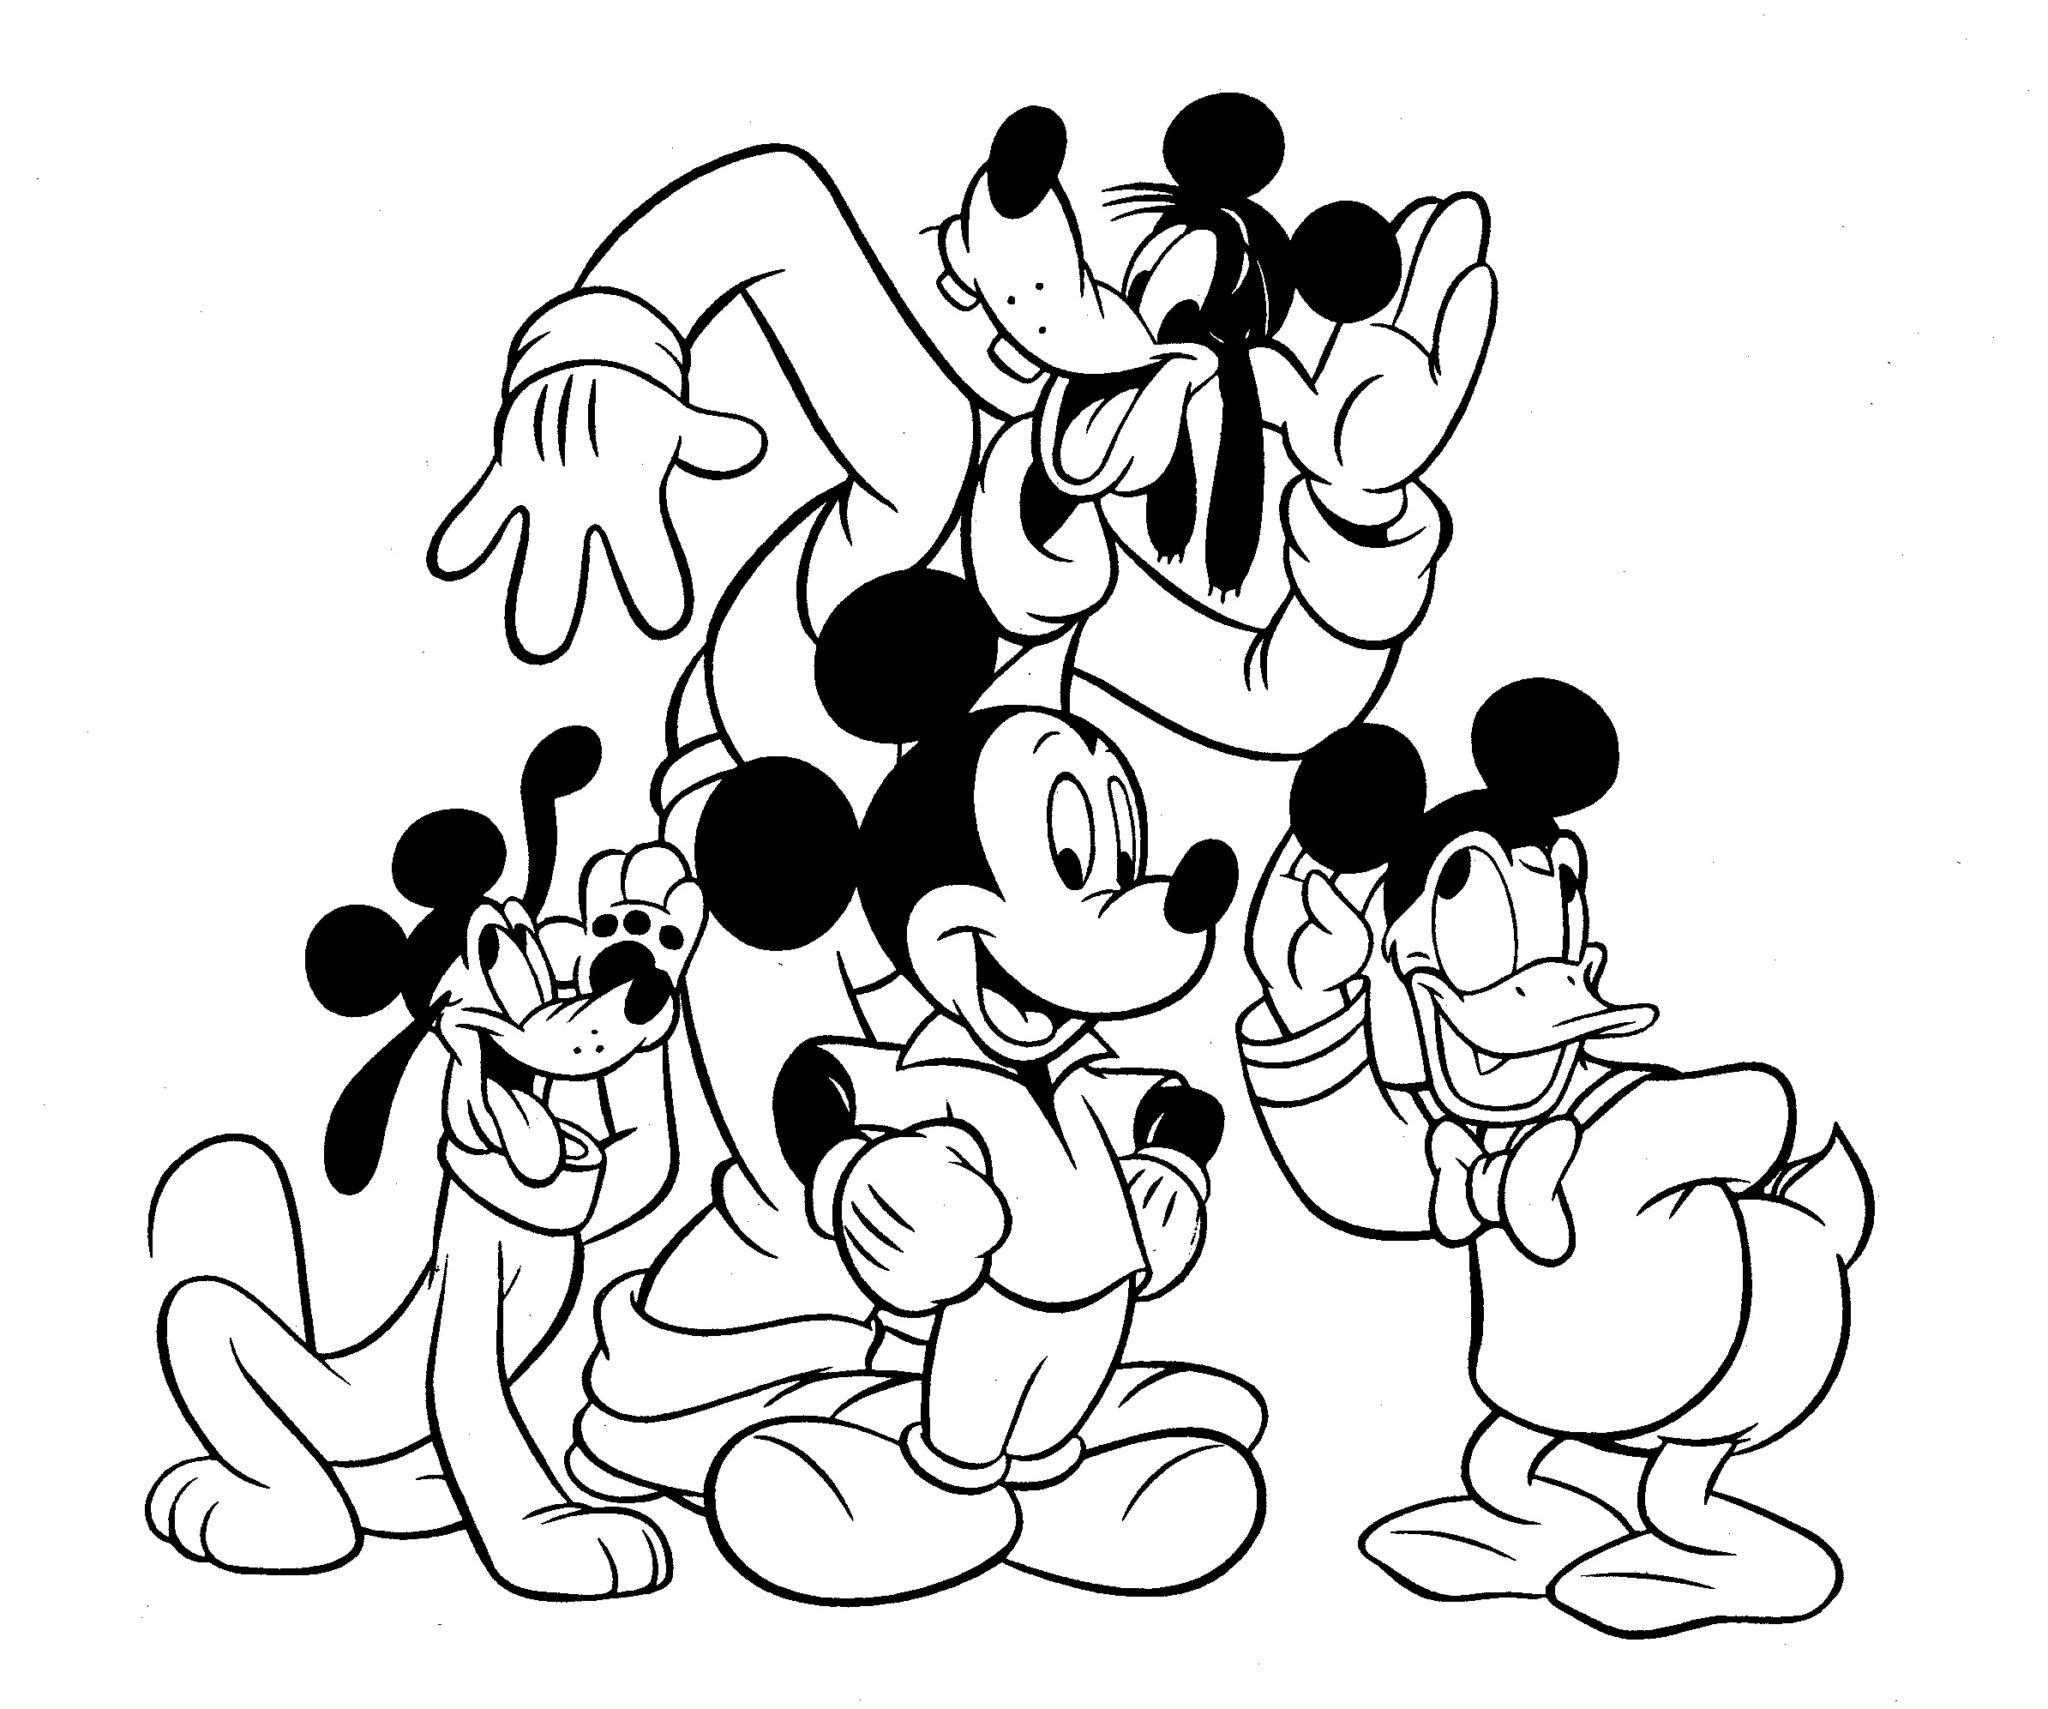 Disney Coloring Pages – Mickey and Gang – The Disney Nerds Podcast